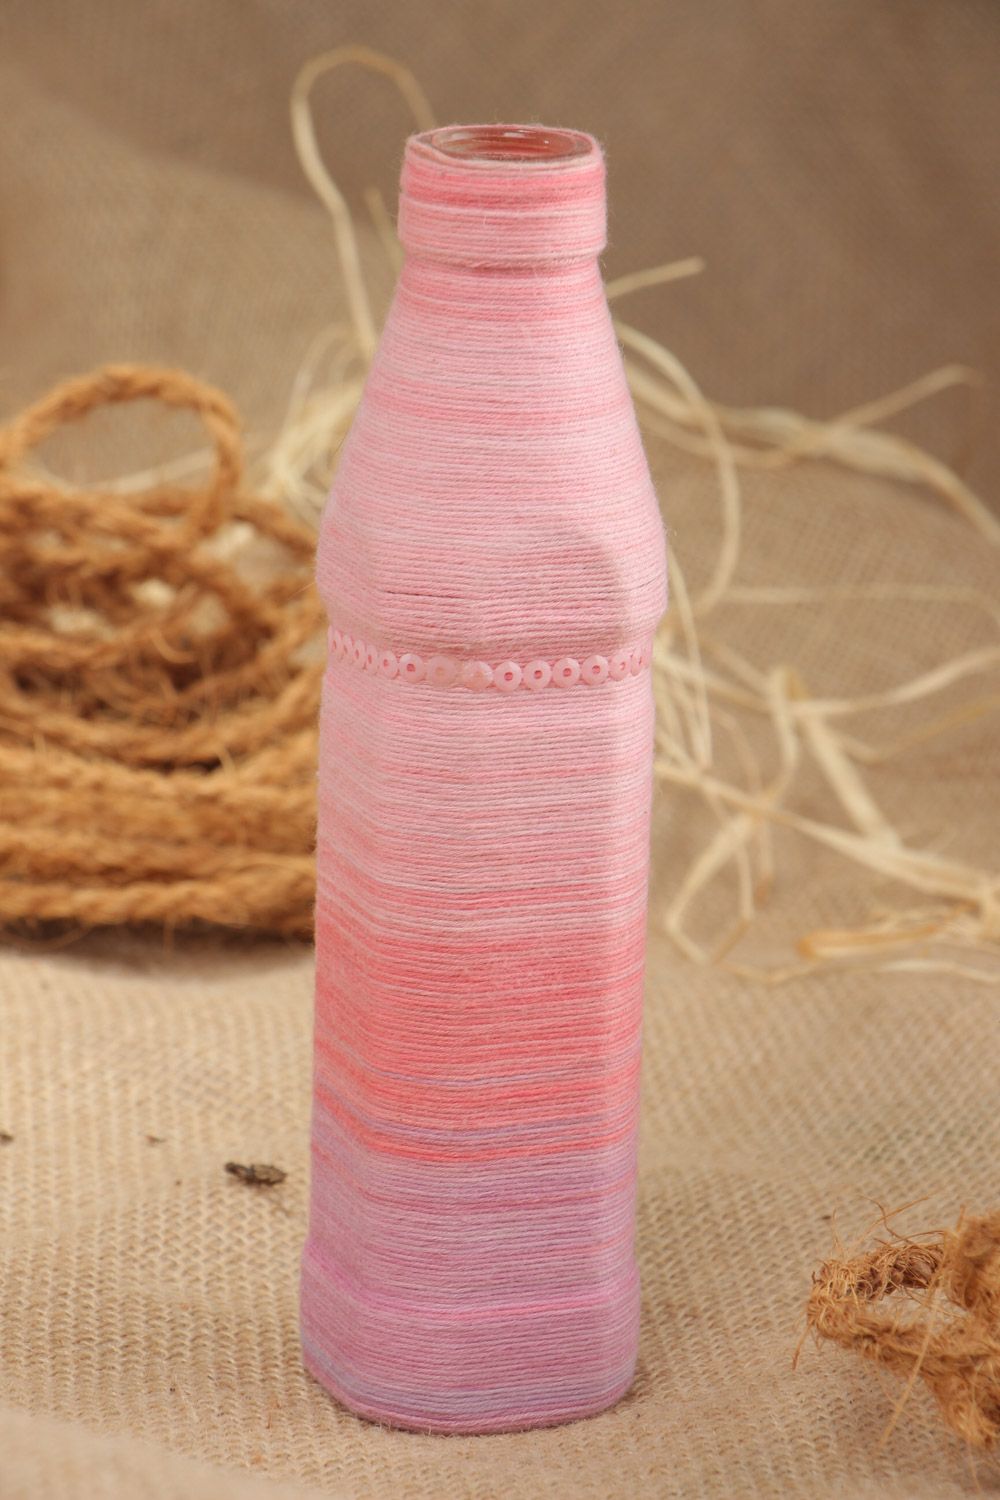 Homemade decorative glass bottle woven over with cotton threads 250 ml photo 1